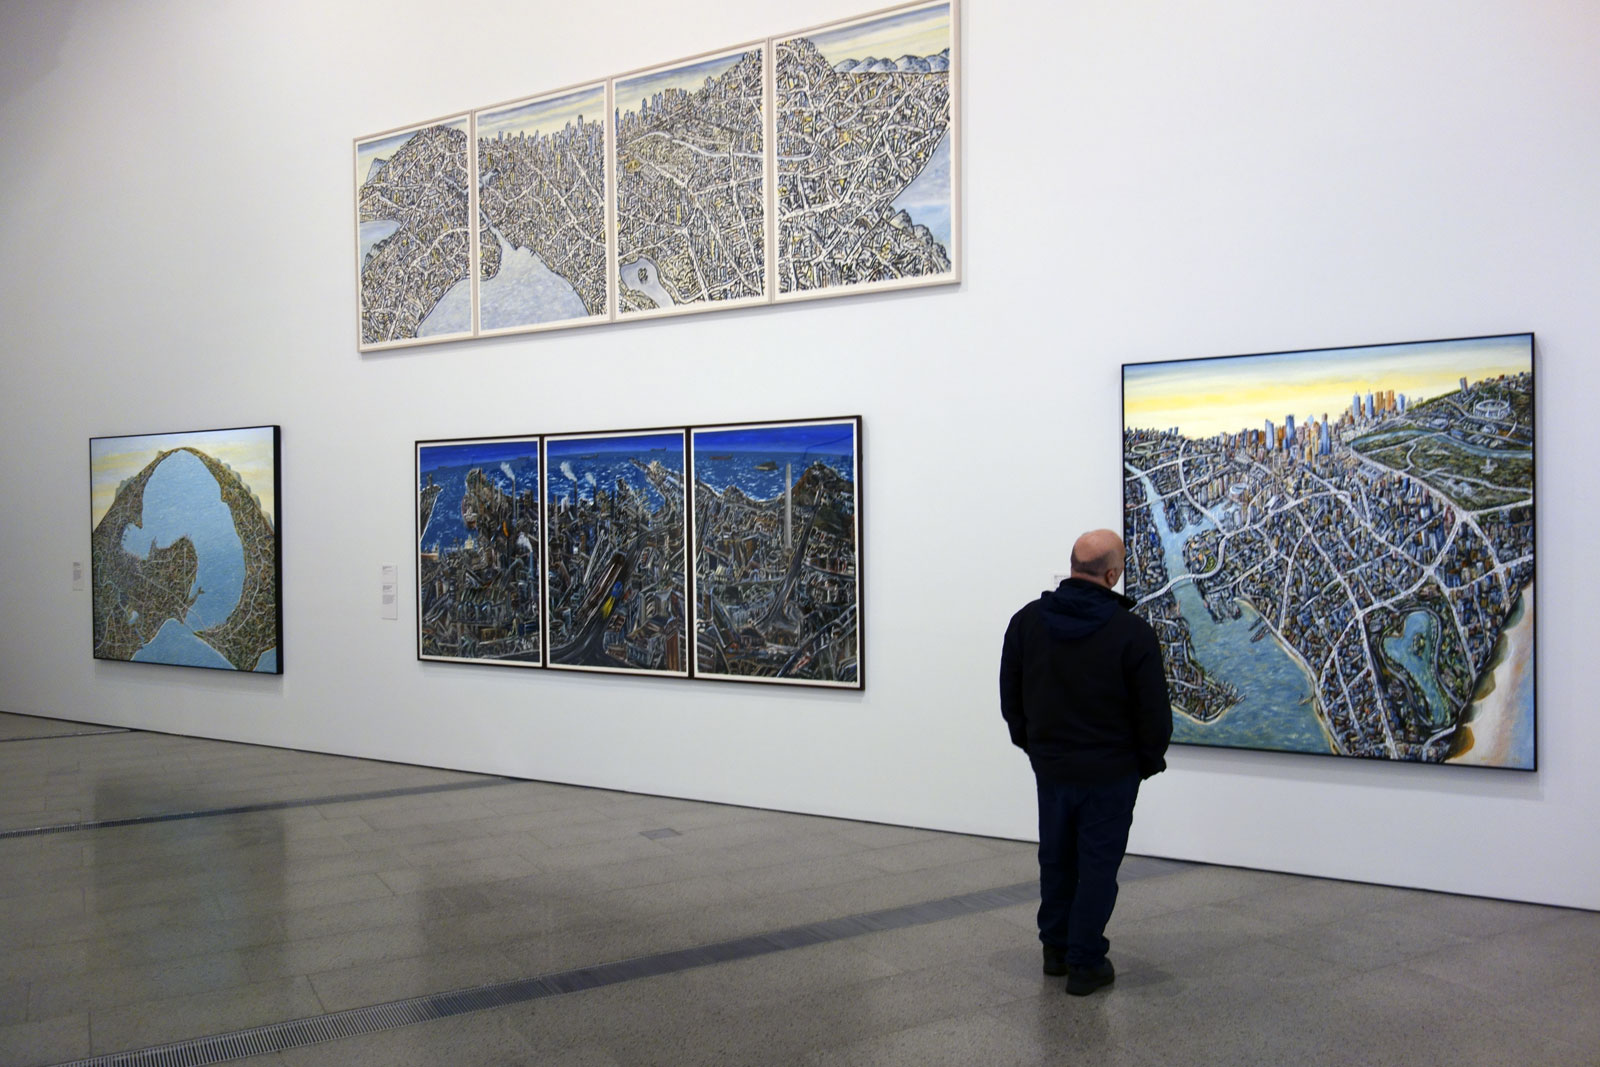 Installation view of the exhibition Jan Senbergs: Observation – Imagination at The Ian Potter Centre: NGV Australia showing at top, 'Extended Melbourne labyrinth' (2013, above); at left, 'Geelong capriccio (if Geelong were settled instead of Melbourne)' (2010, above); at right 'Melbourne capriccio 3'